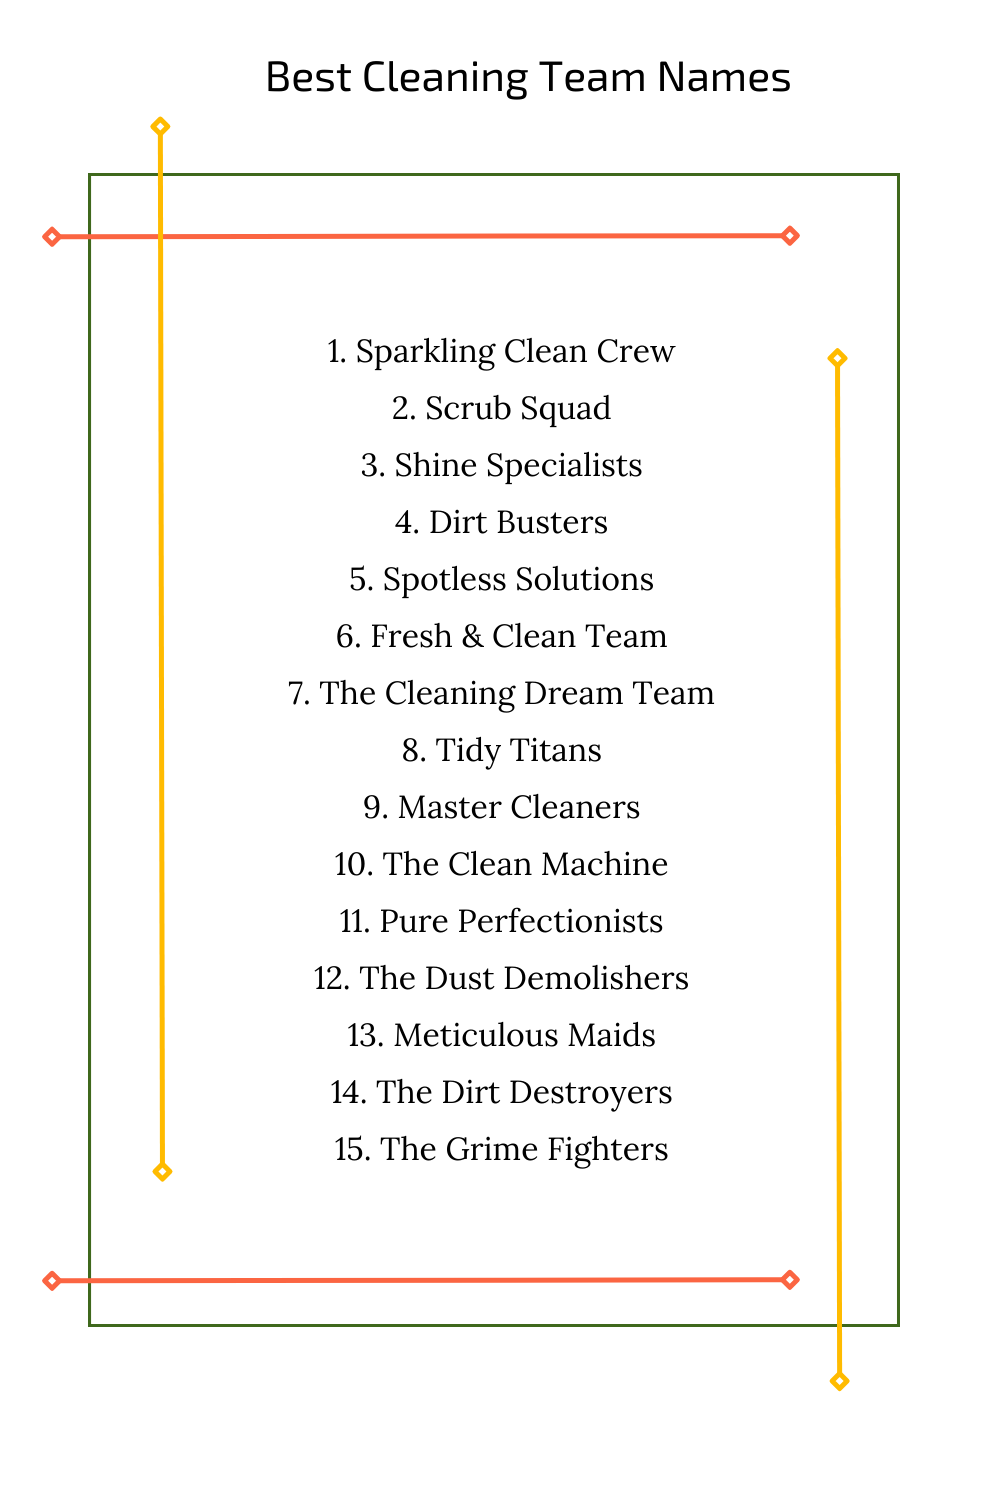 Best Cleaning Team Names